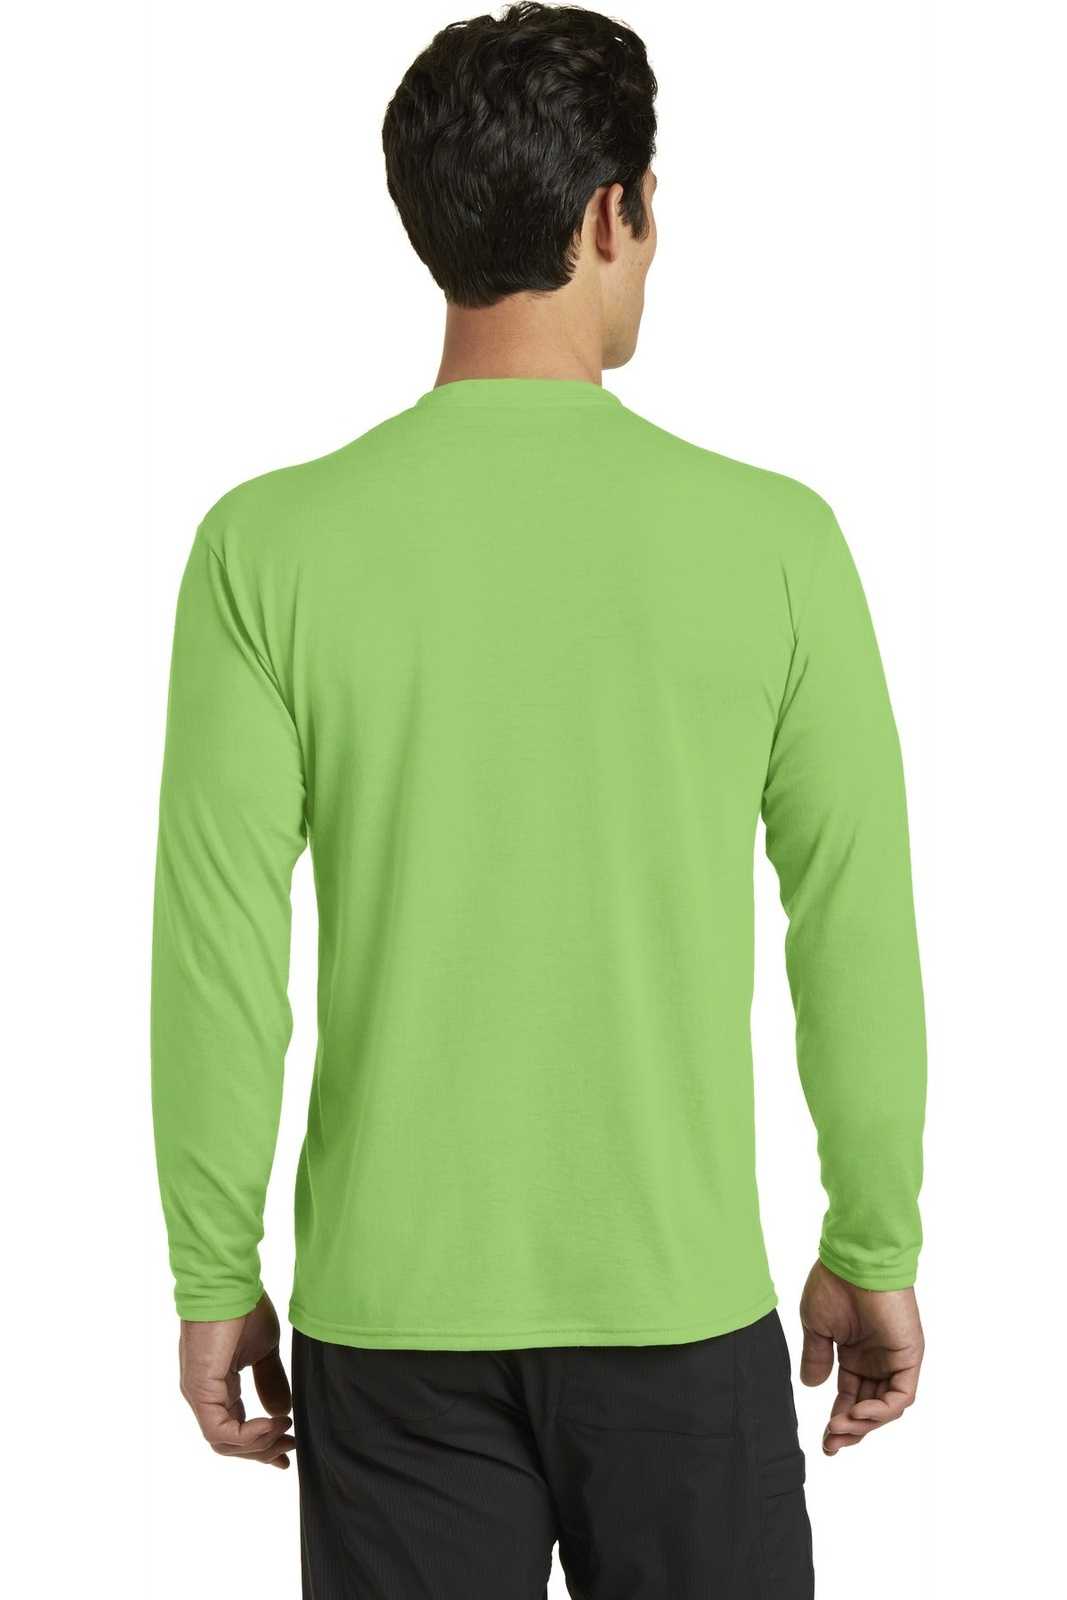 Port & Company PC381LS Long Sleeve Performance Blend Tee - Lime - HIT a Double - 1